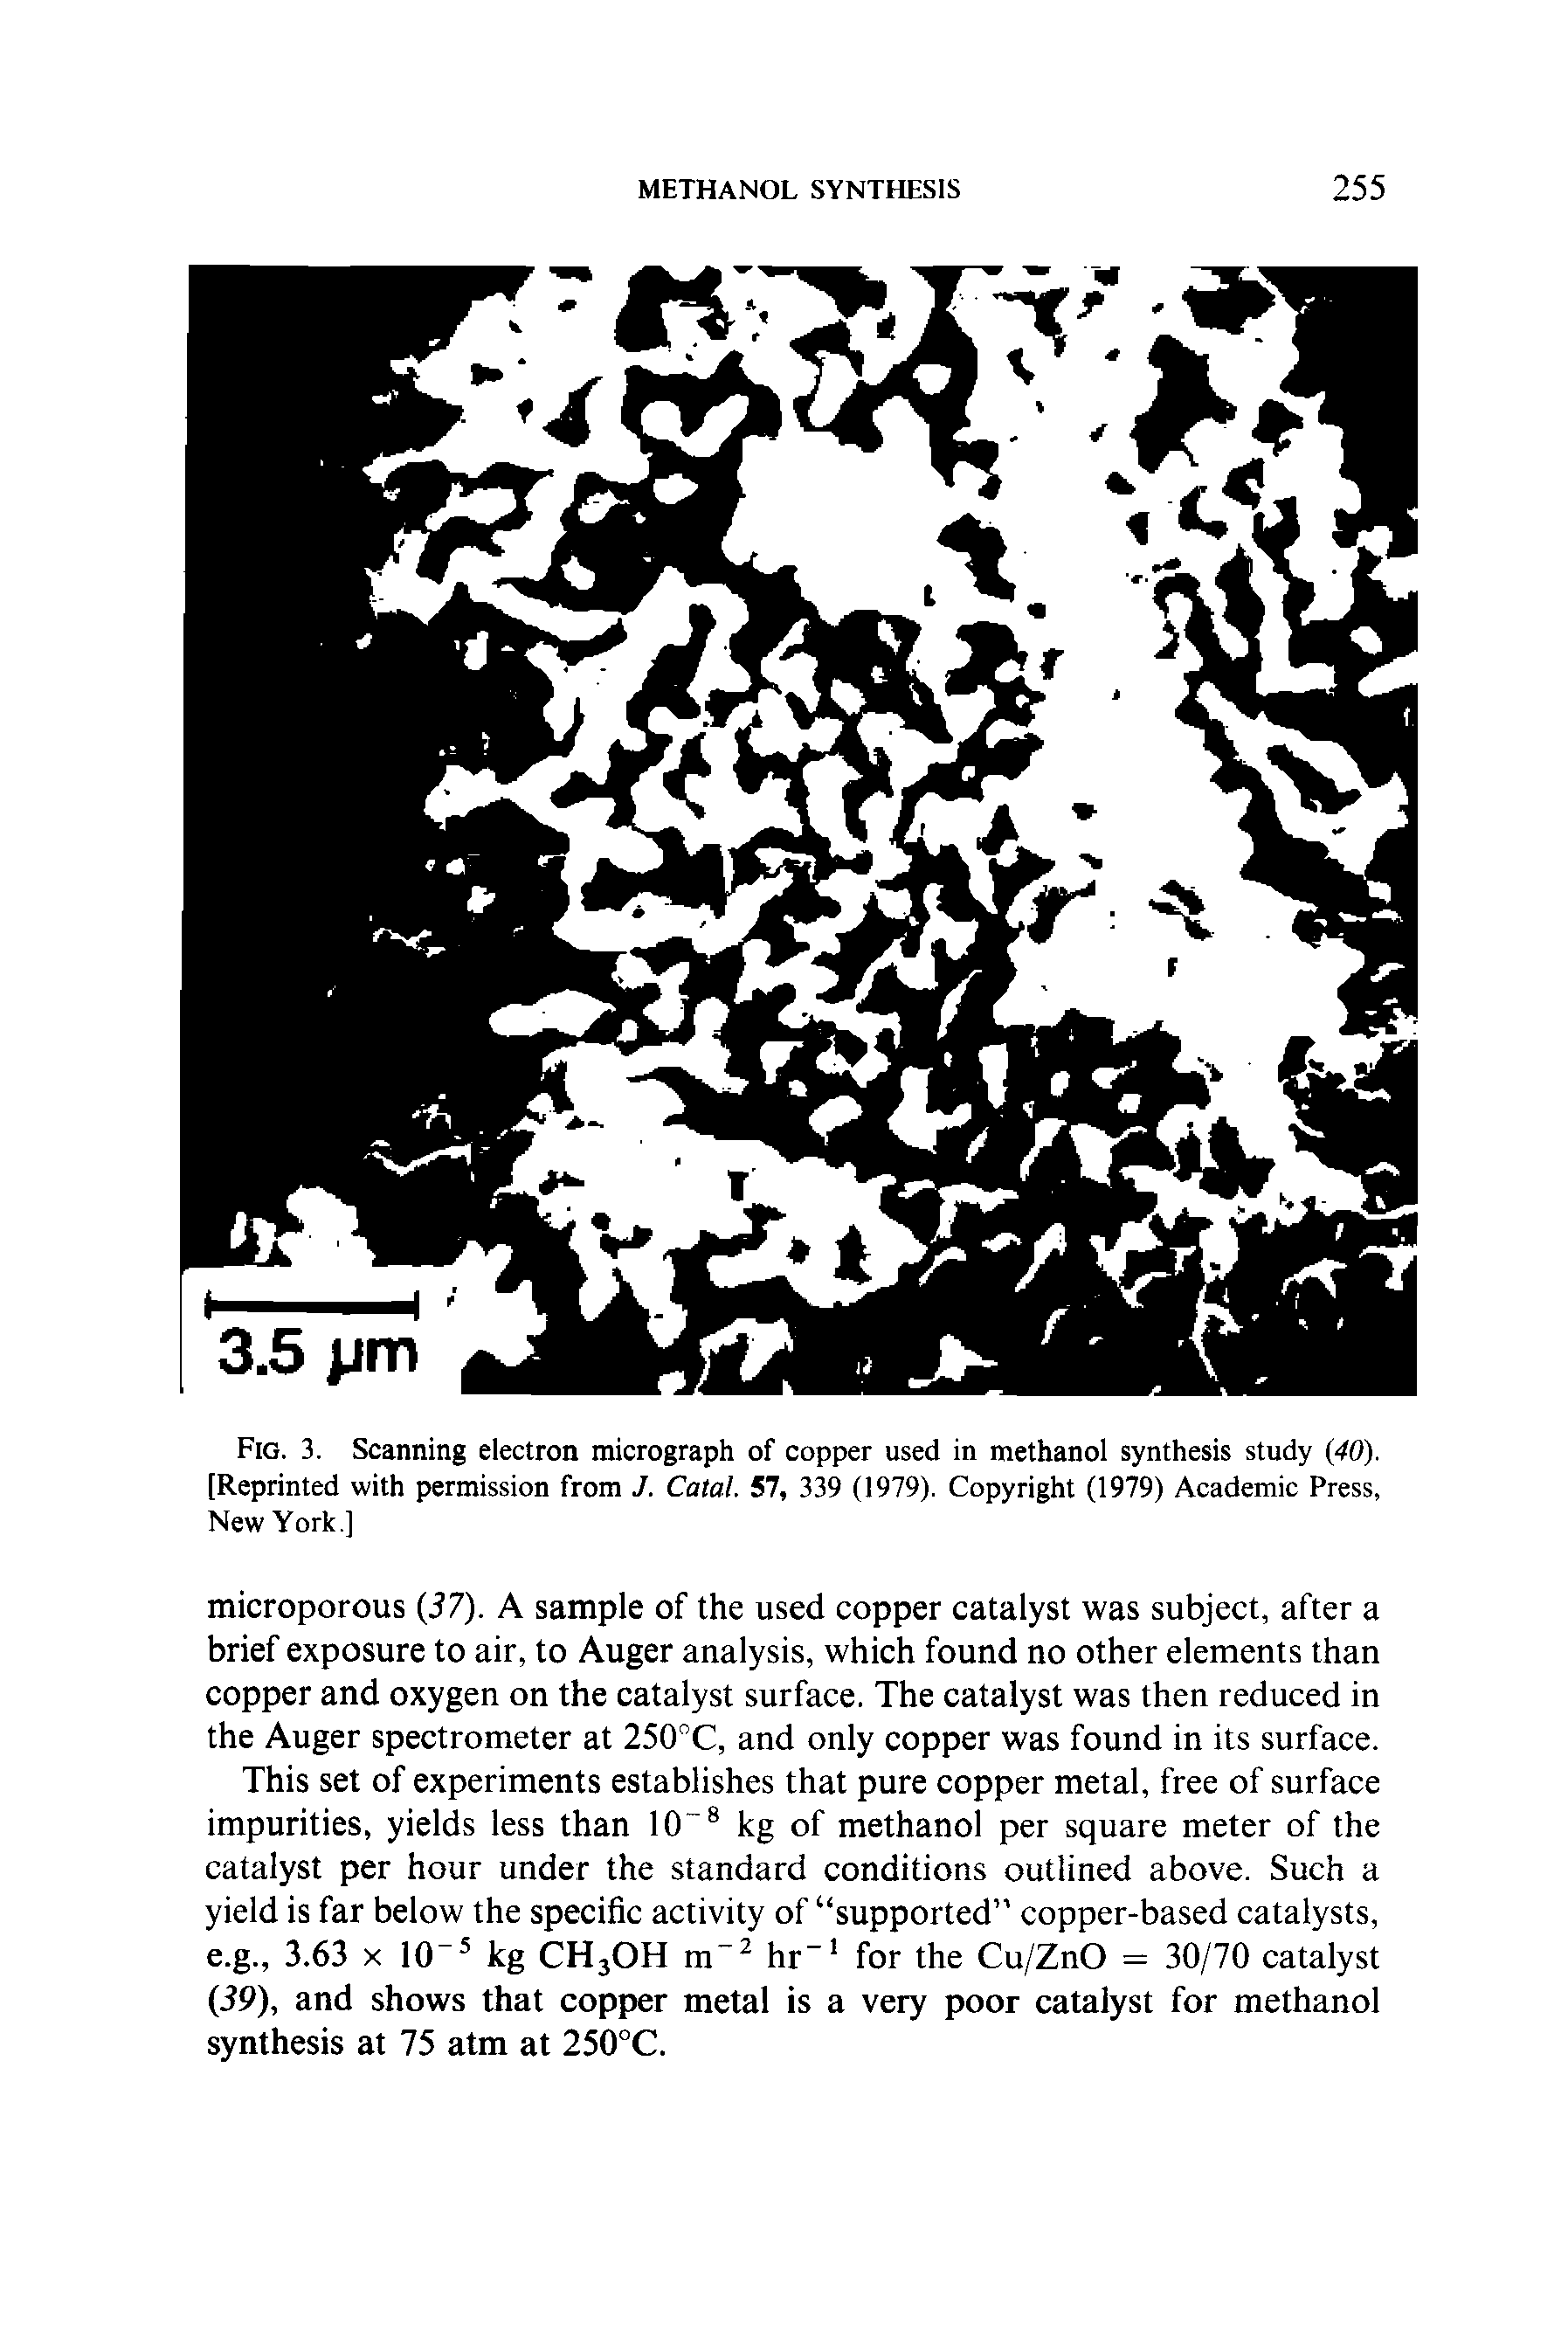 Fig. 3. Scanning electron micrograph of copper used in methanol synthesis study (40). [Reprinted with permission from J. Catal. 57, 339 (1979). Copyright (1979) Academic Press, New York.]...